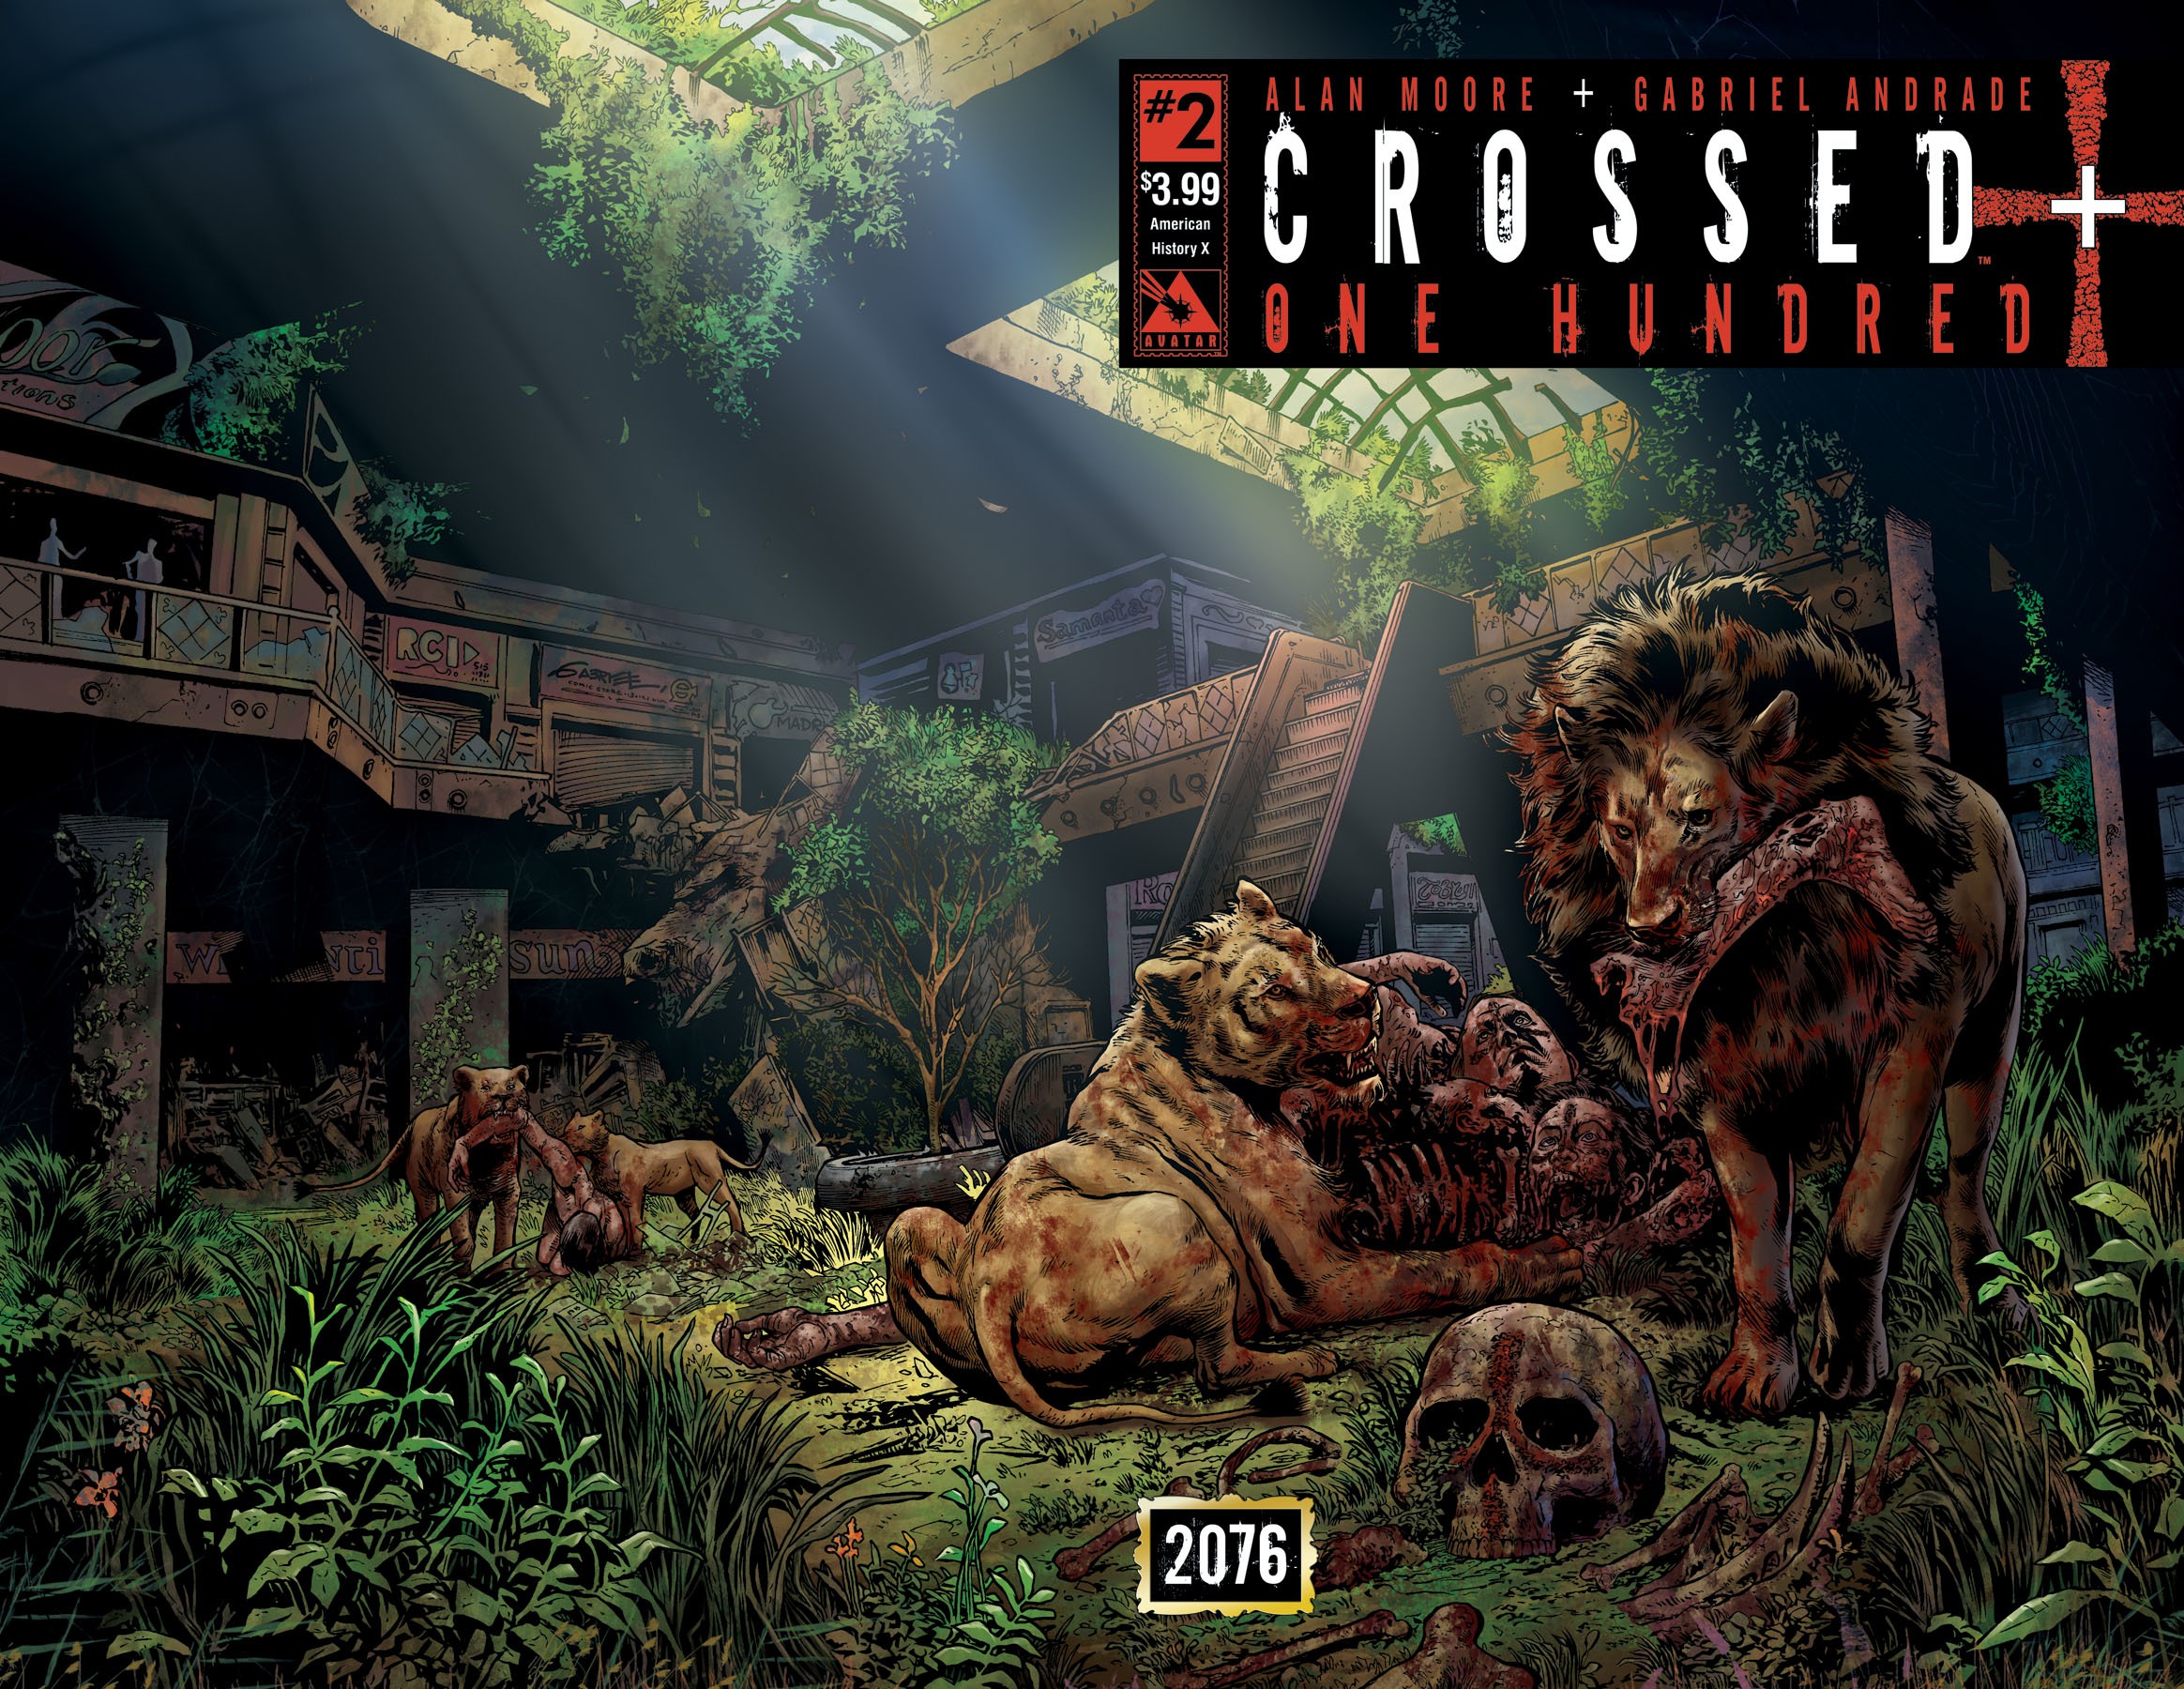 Read online Crossed Plus One Hundred comic -  Issue #2 - 6